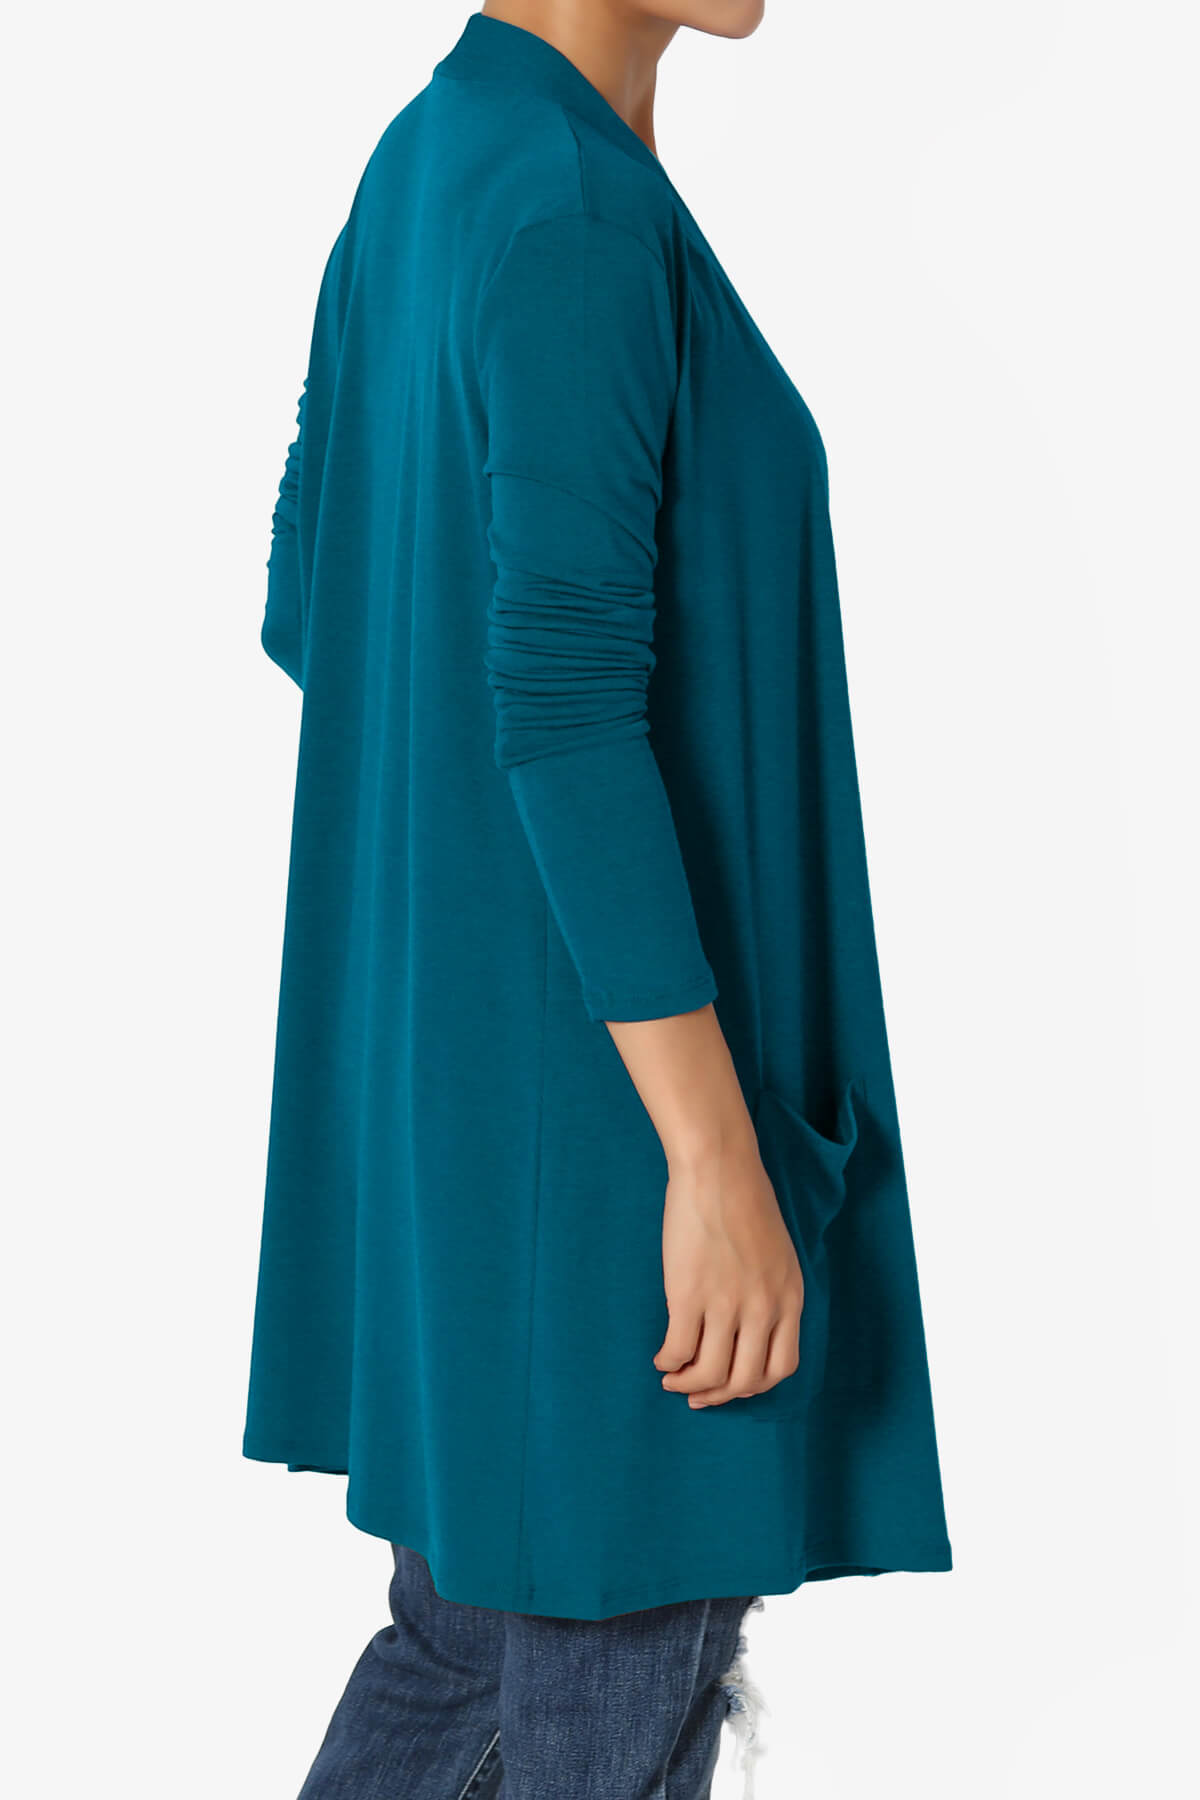 Daday Long Sleeve Pocket Open Front Cardigan TEAL_4